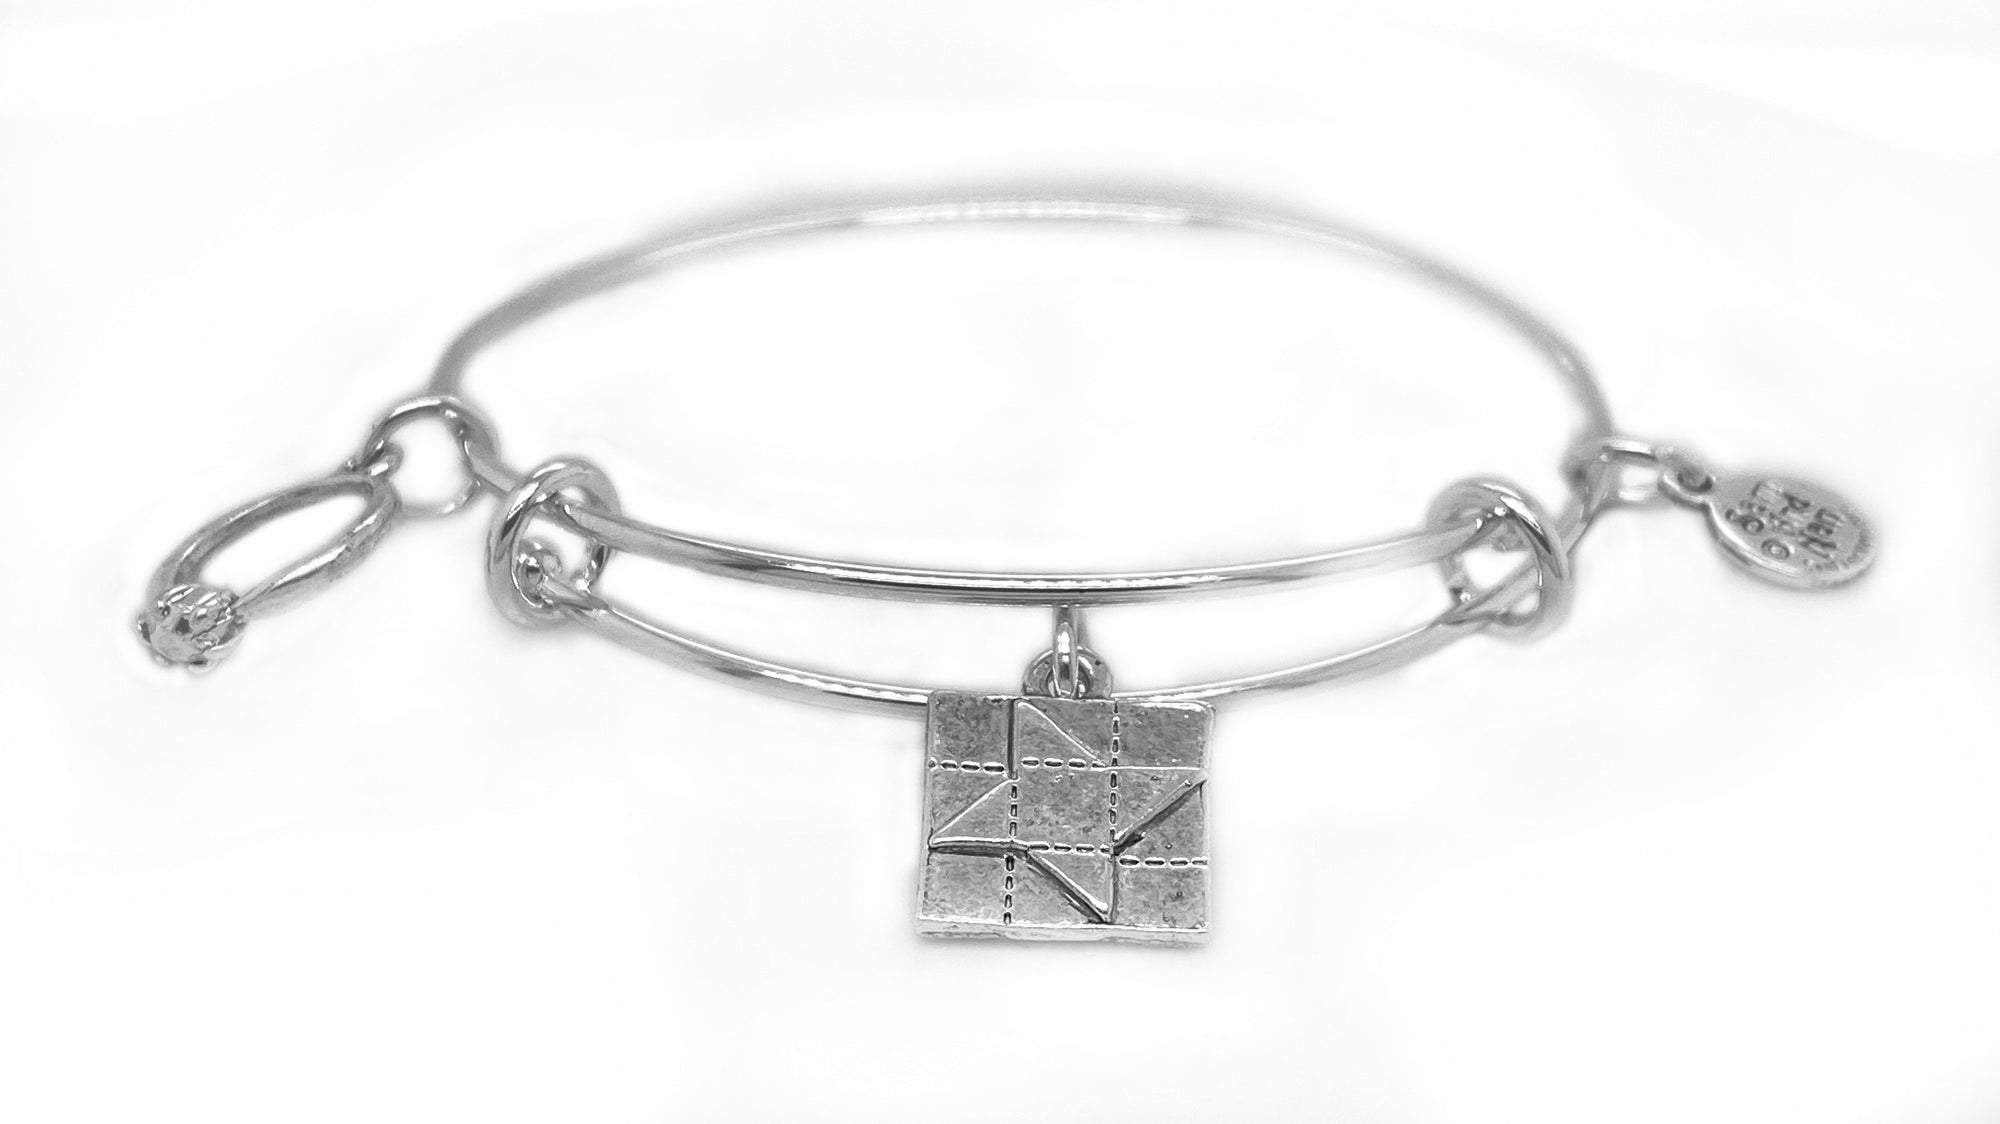 Sewing quilting silver friendship ring charm bangle